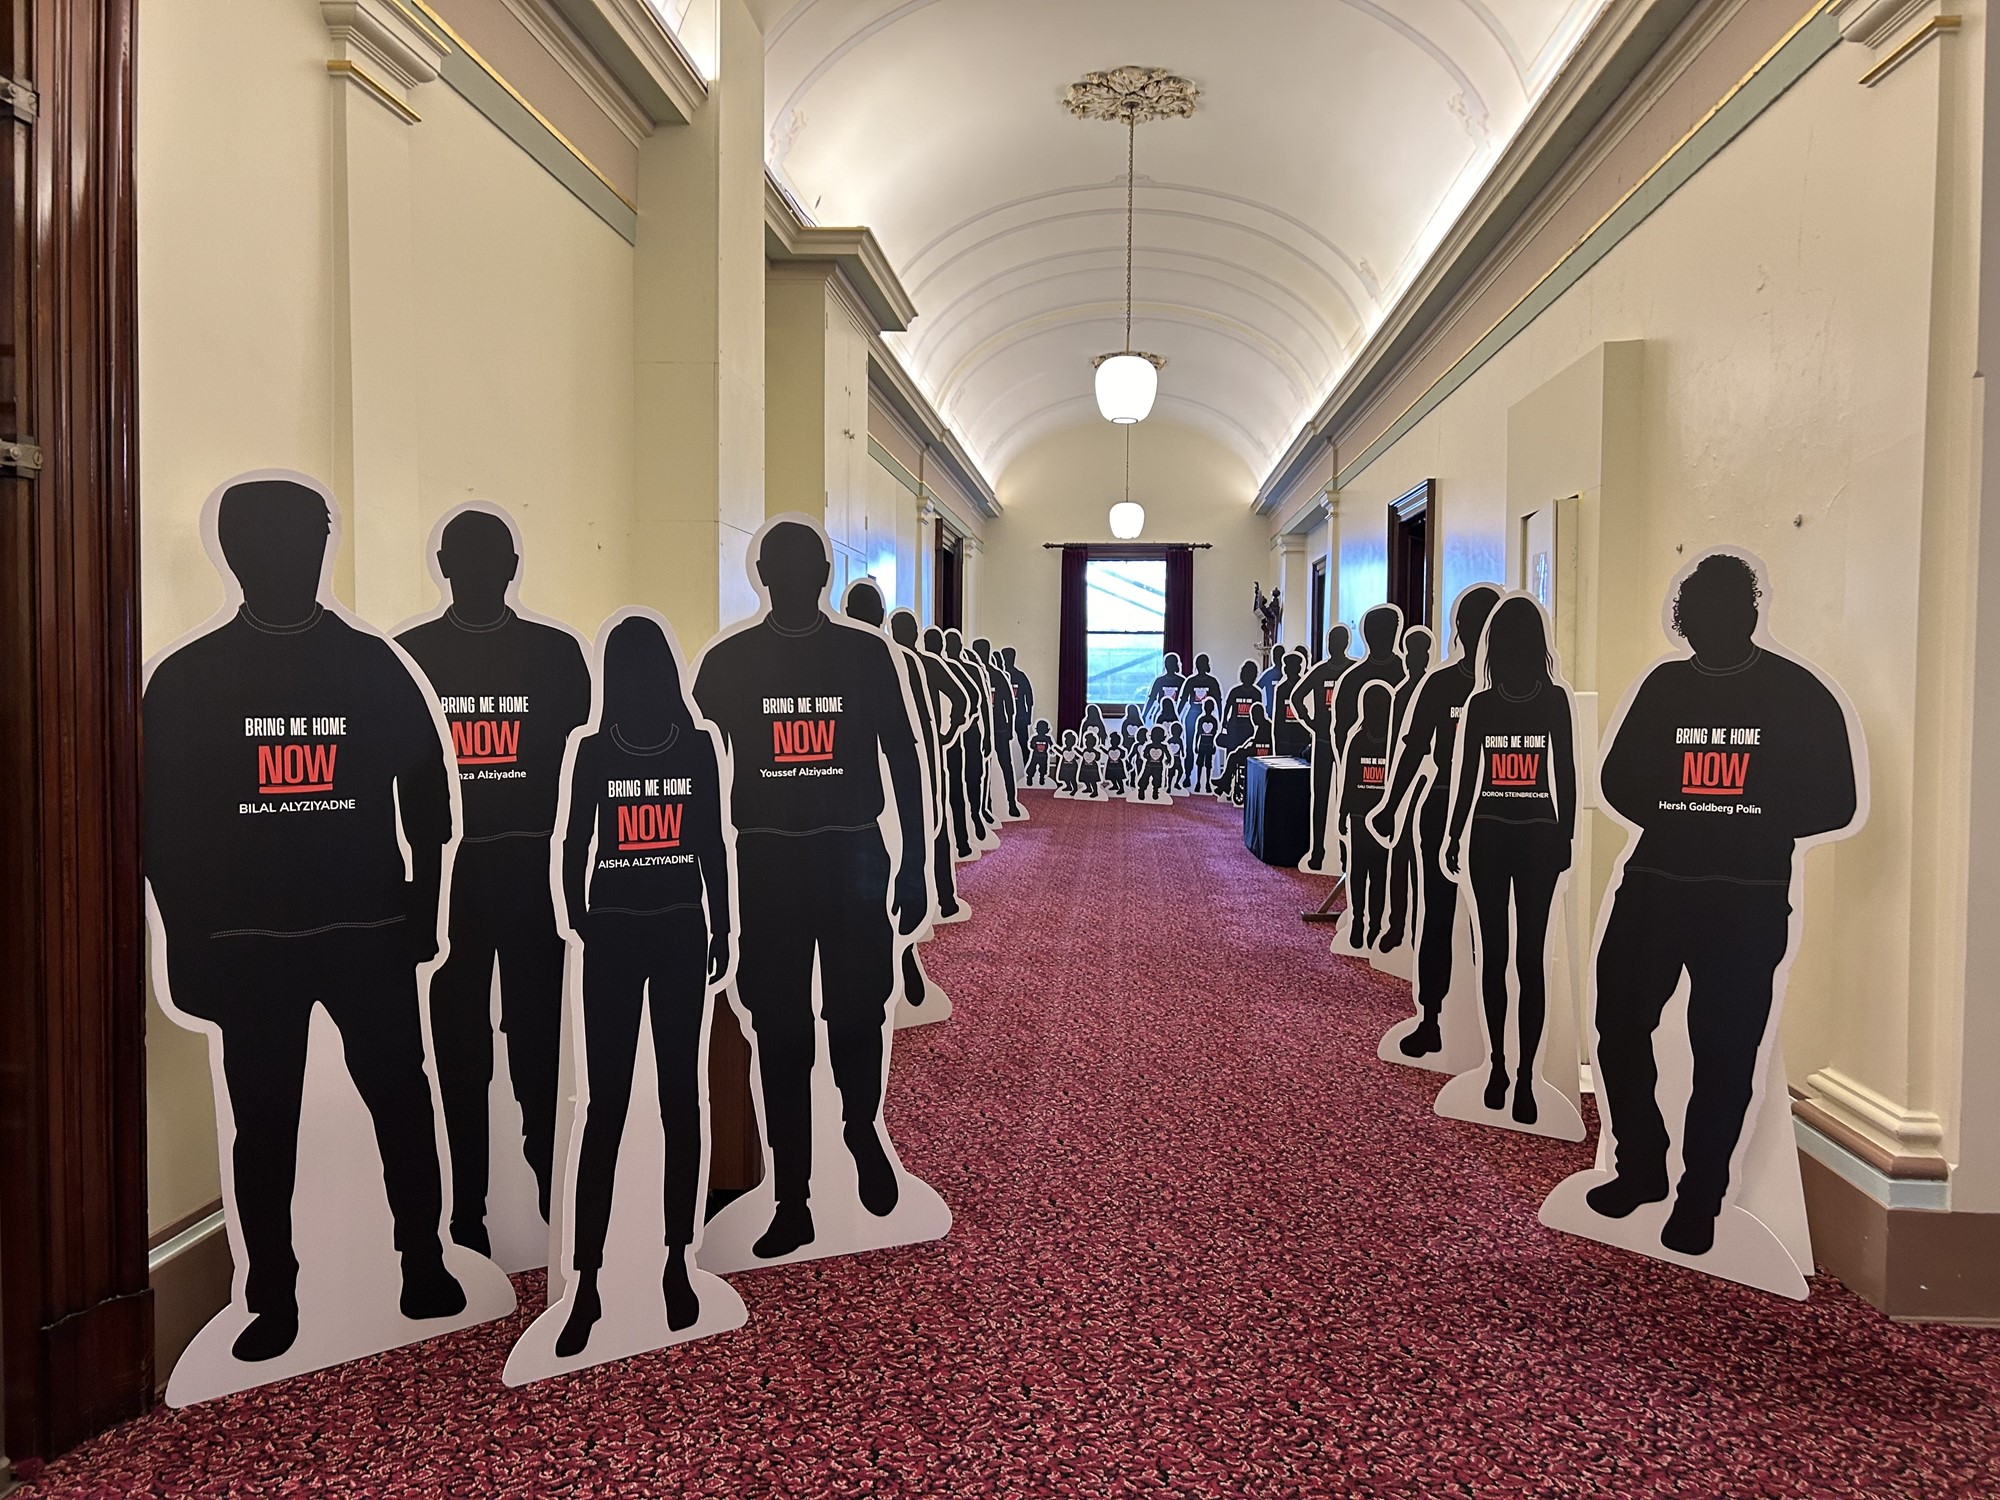 A hallway corridor with red carpet and white walls lines with two dozen silhouette carboard cutouts lined along the side